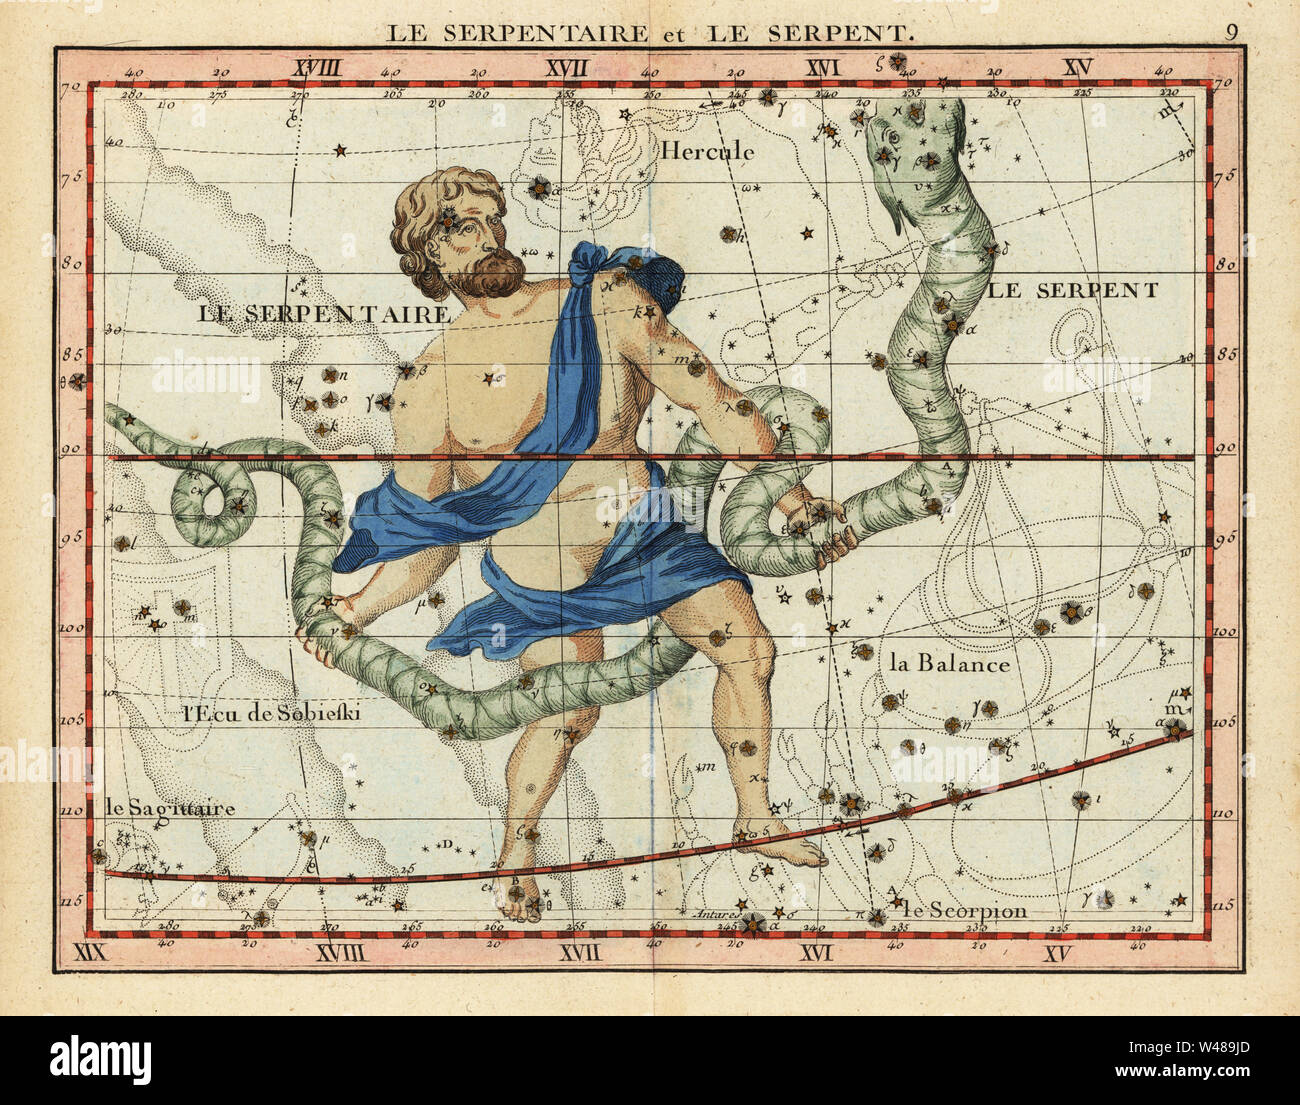 Constellations Ophiuchus and Serpens, with Hercules, Libra, Scorpius, and Scutum. Le serpentaire et le serpent.Handcoloured copperplate engraving from John Flamsteed and Nicolas Fortin’s Celestial Atlas or Atlas Celeste de Flamsteed, Lalande, Paris, 1795. Stock Photo